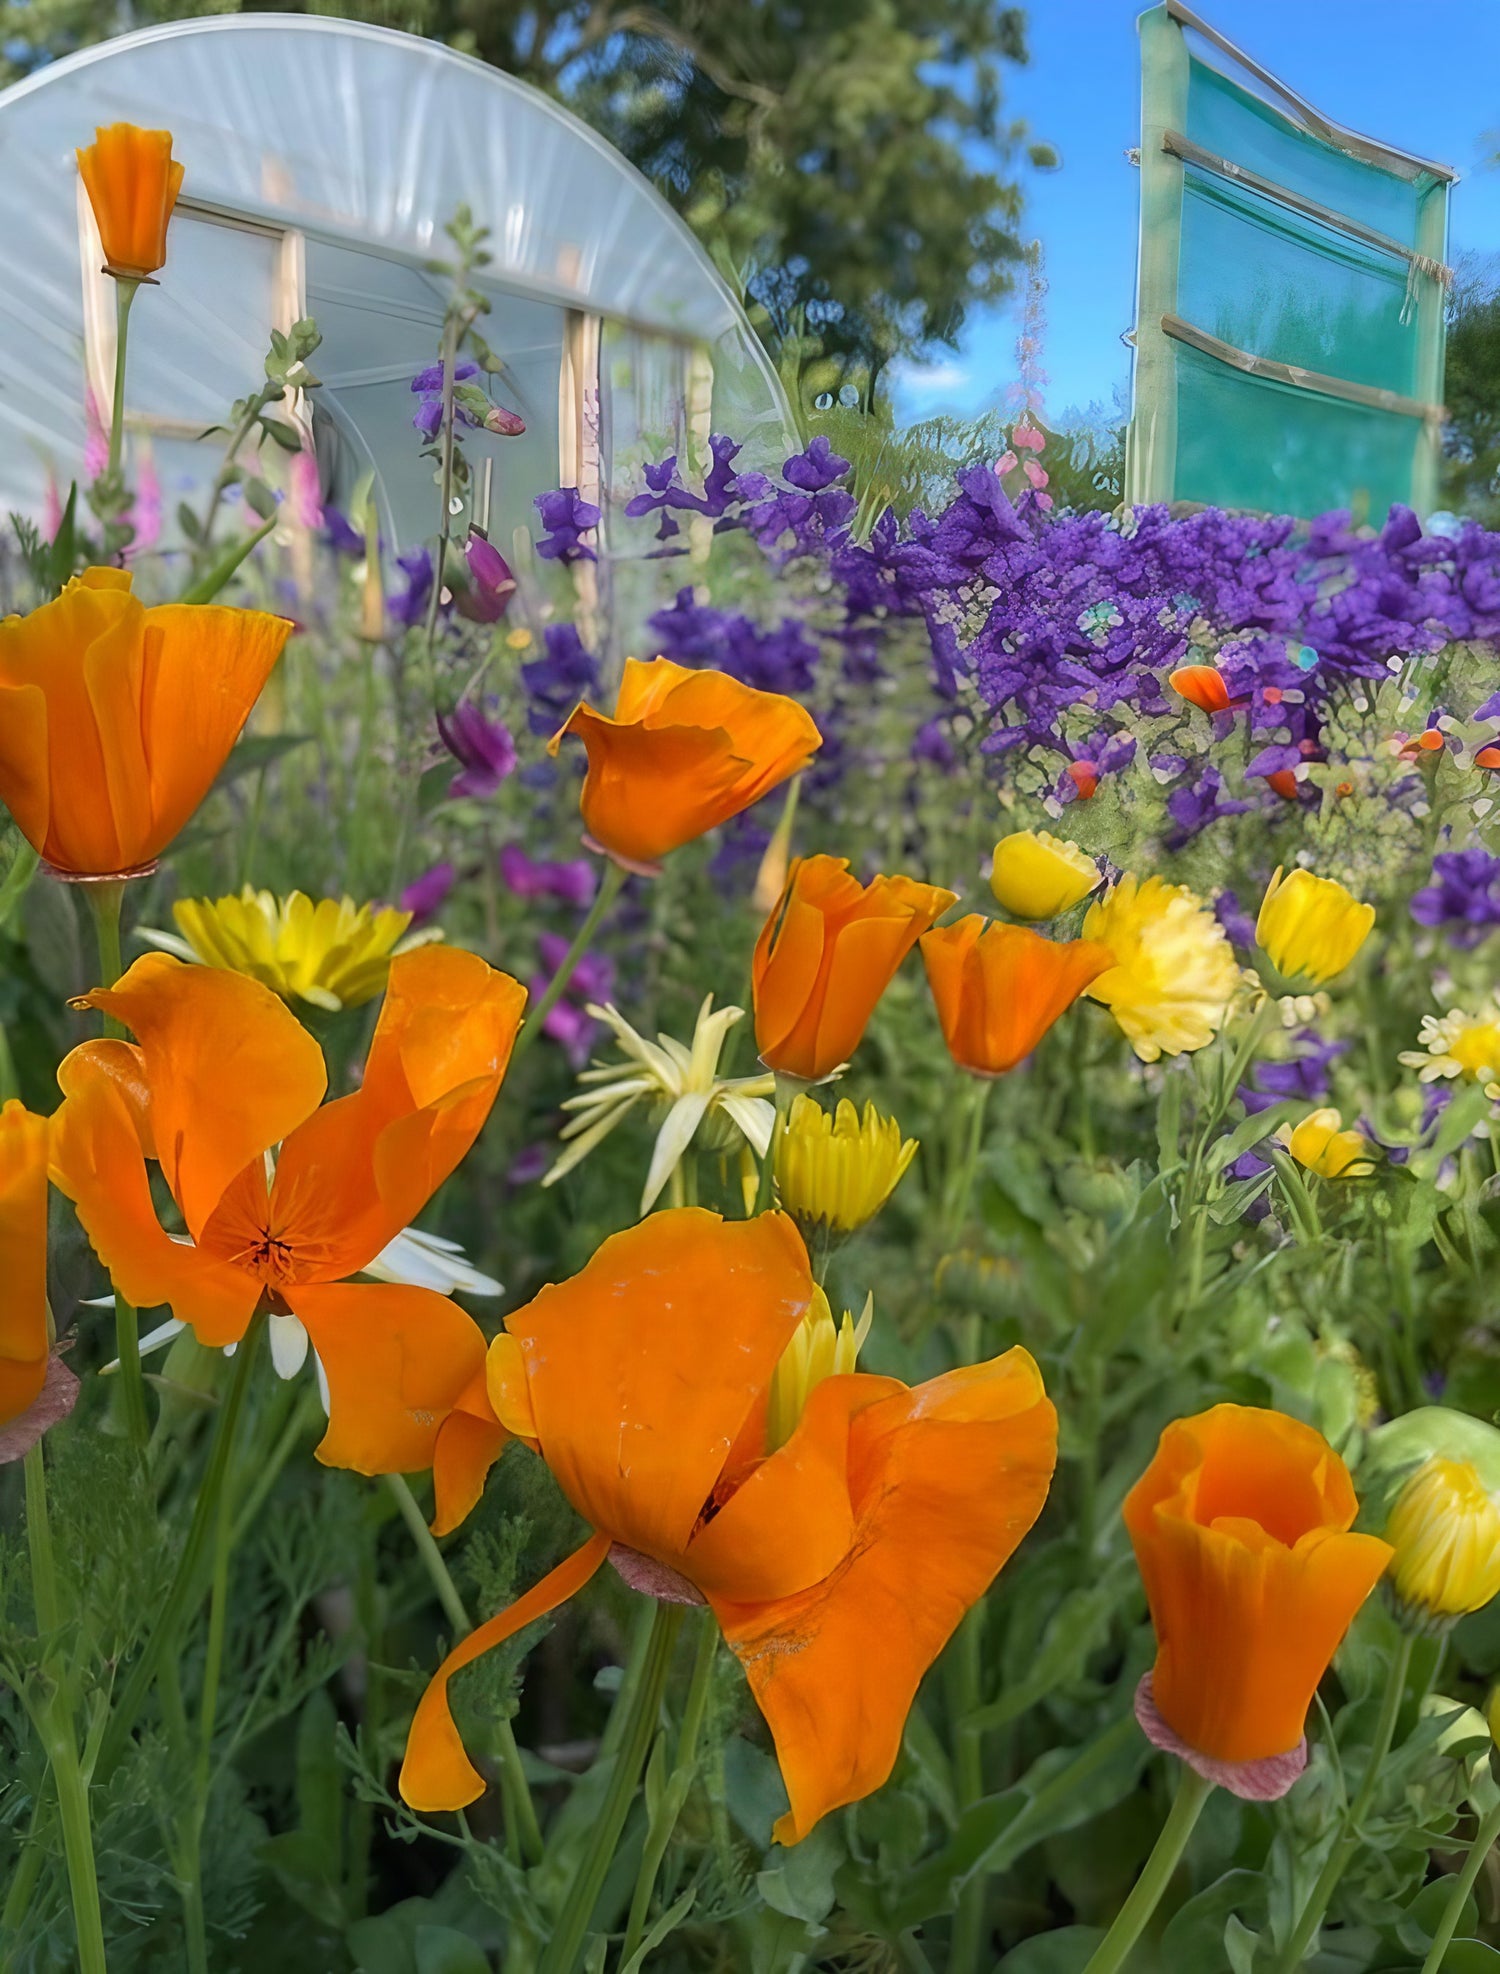 Scenic view of Golden West California poppies blooming near a greenhouse